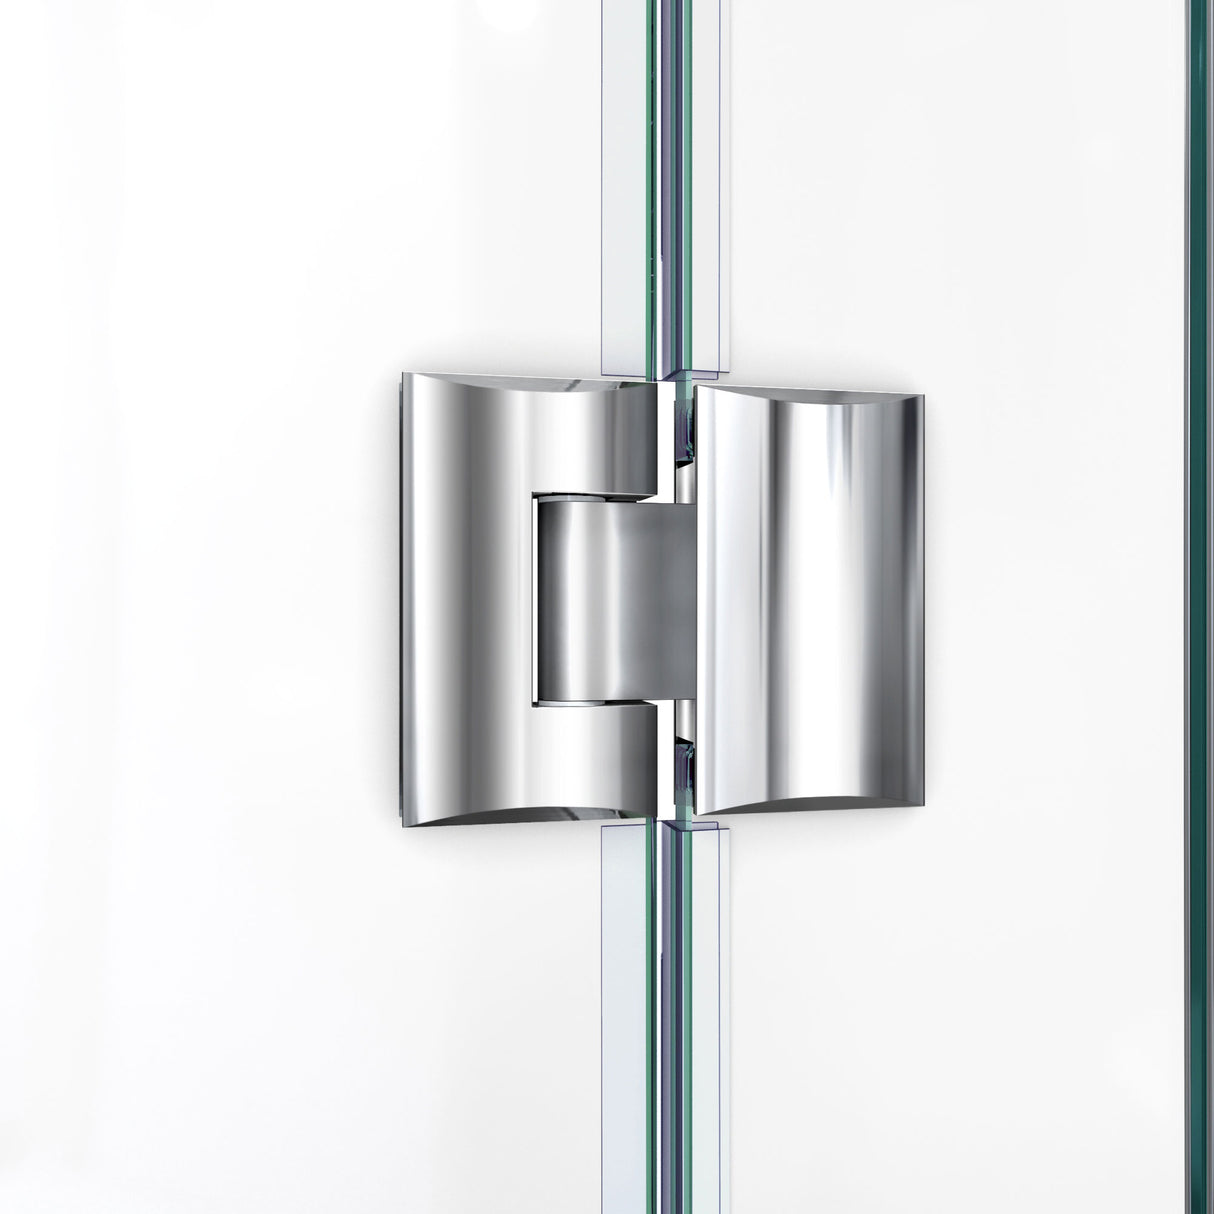 DreamLine Unidoor-X 48 3/8 in. W x 34 in. D x 72 in. H Frameless Hinged Shower Enclosure in Chrome